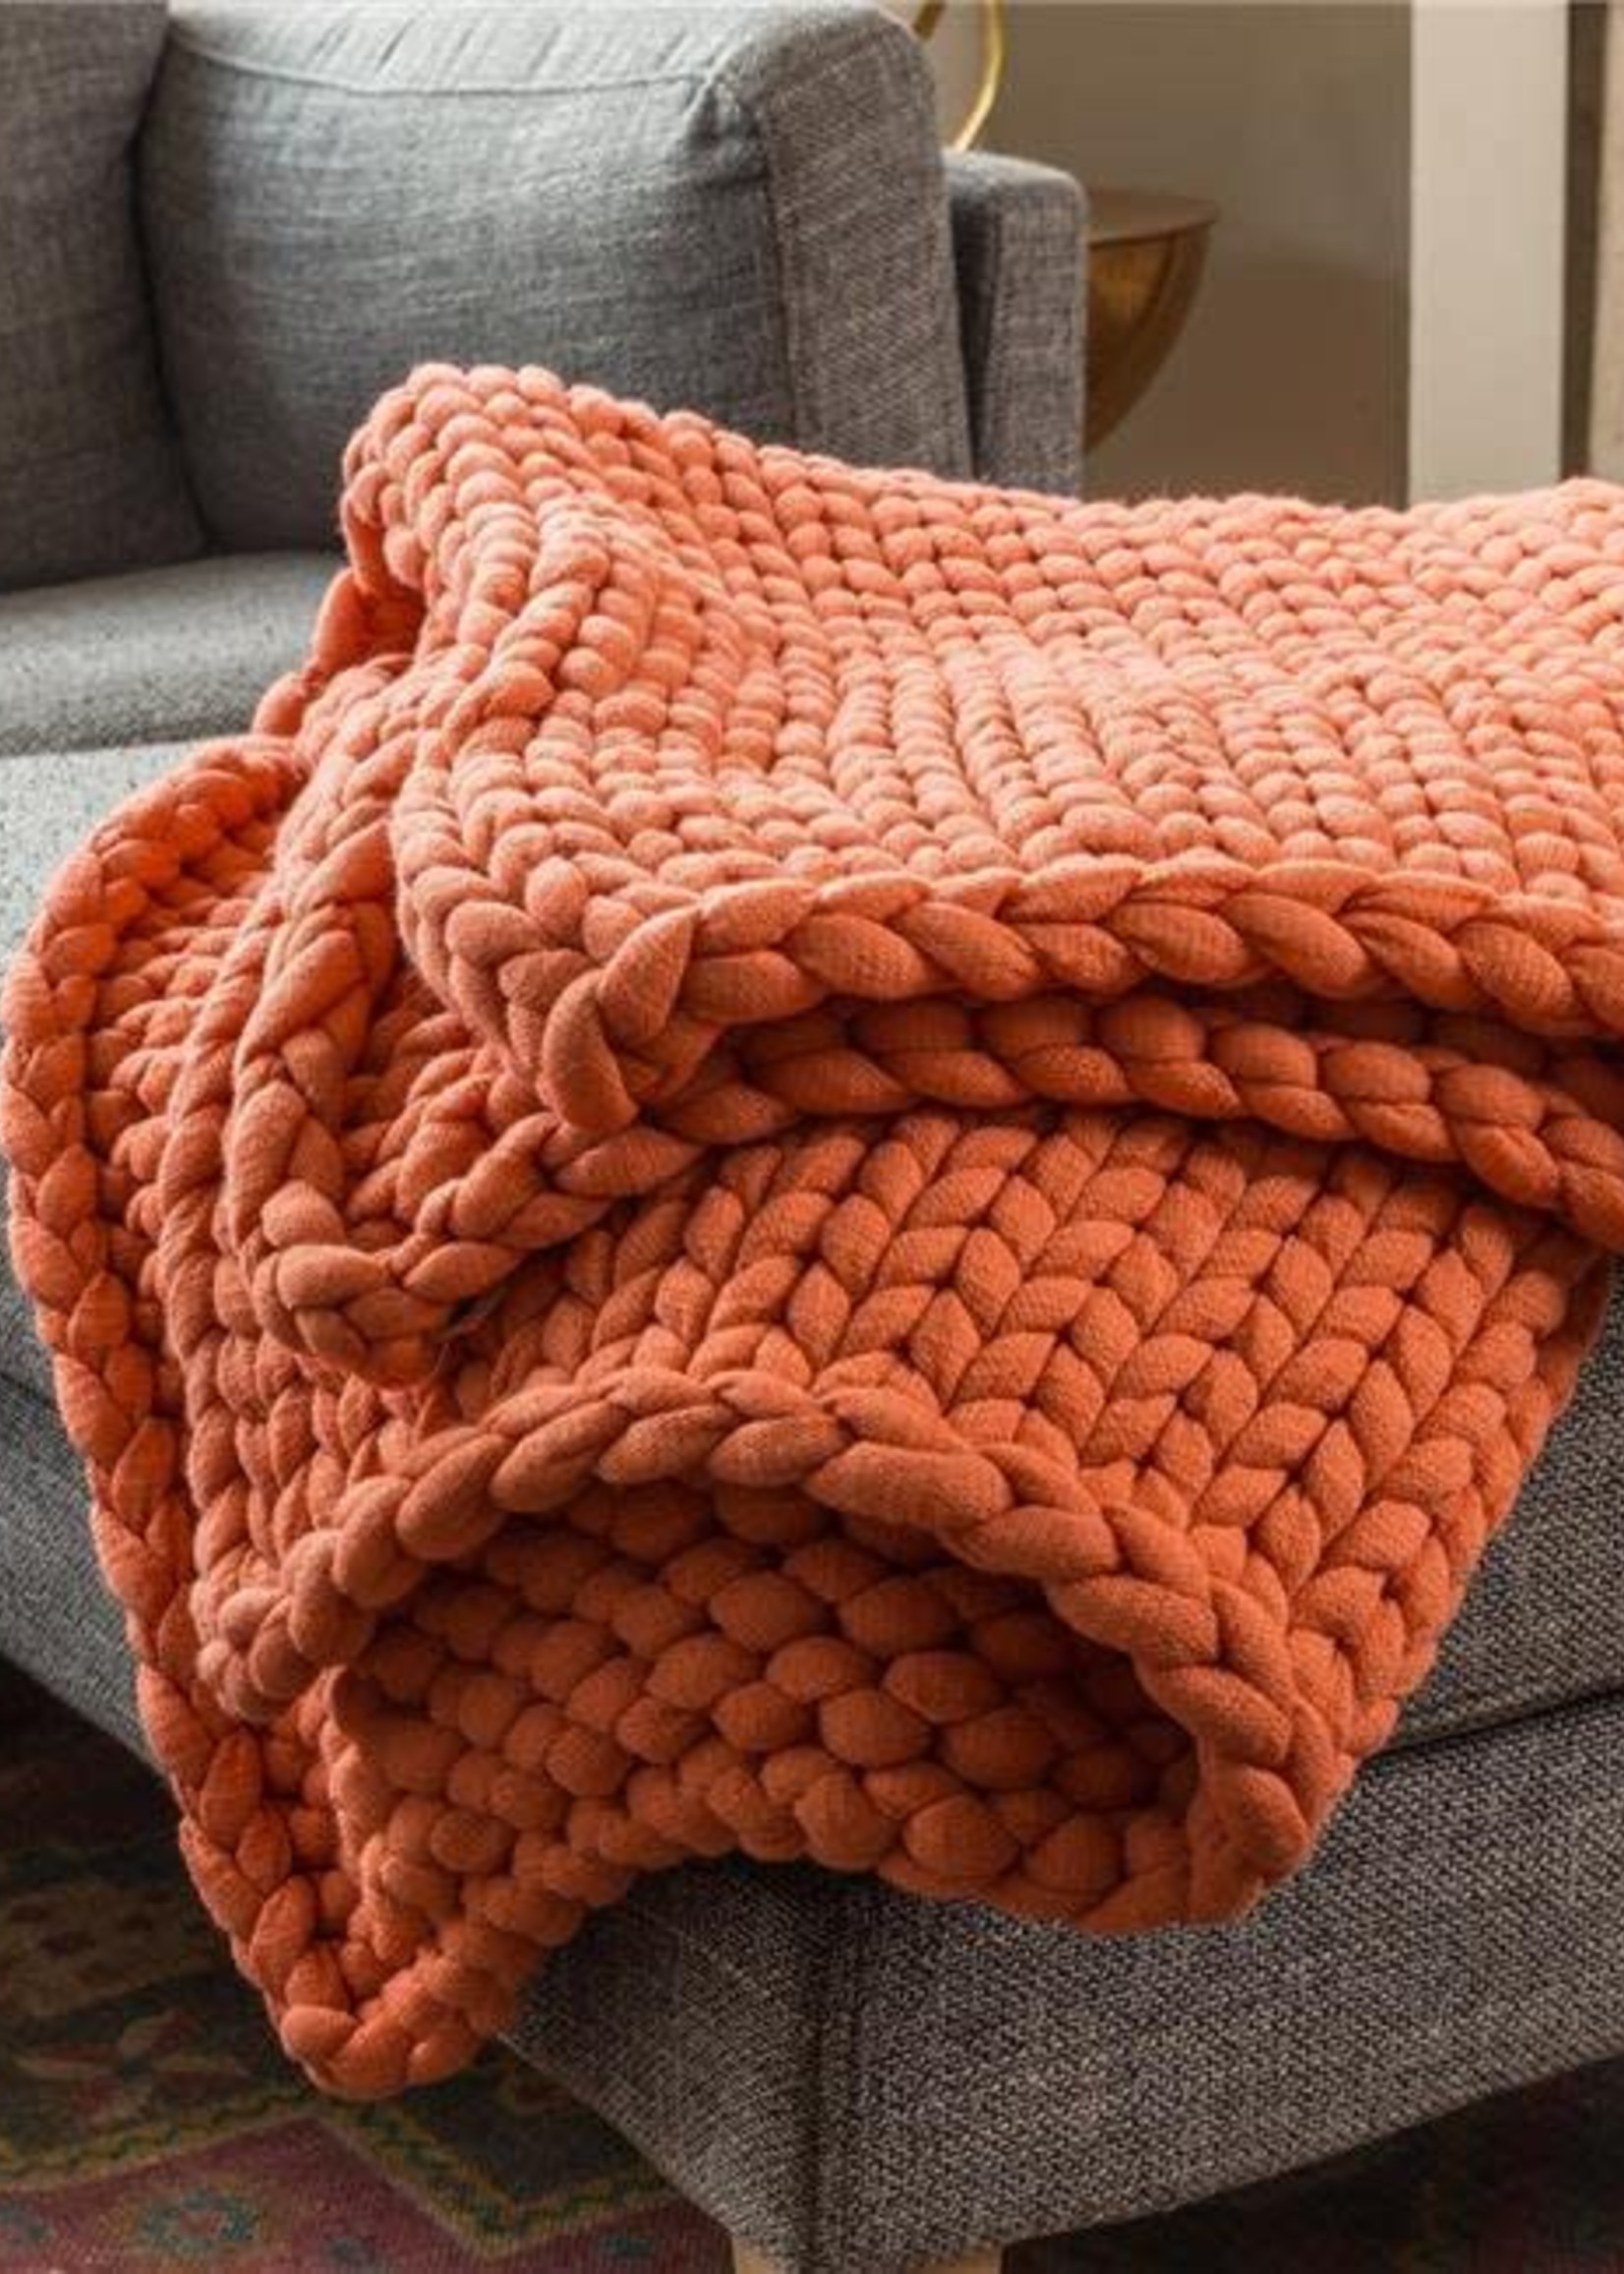 American Heritage Textiles Chunky Knit Throw